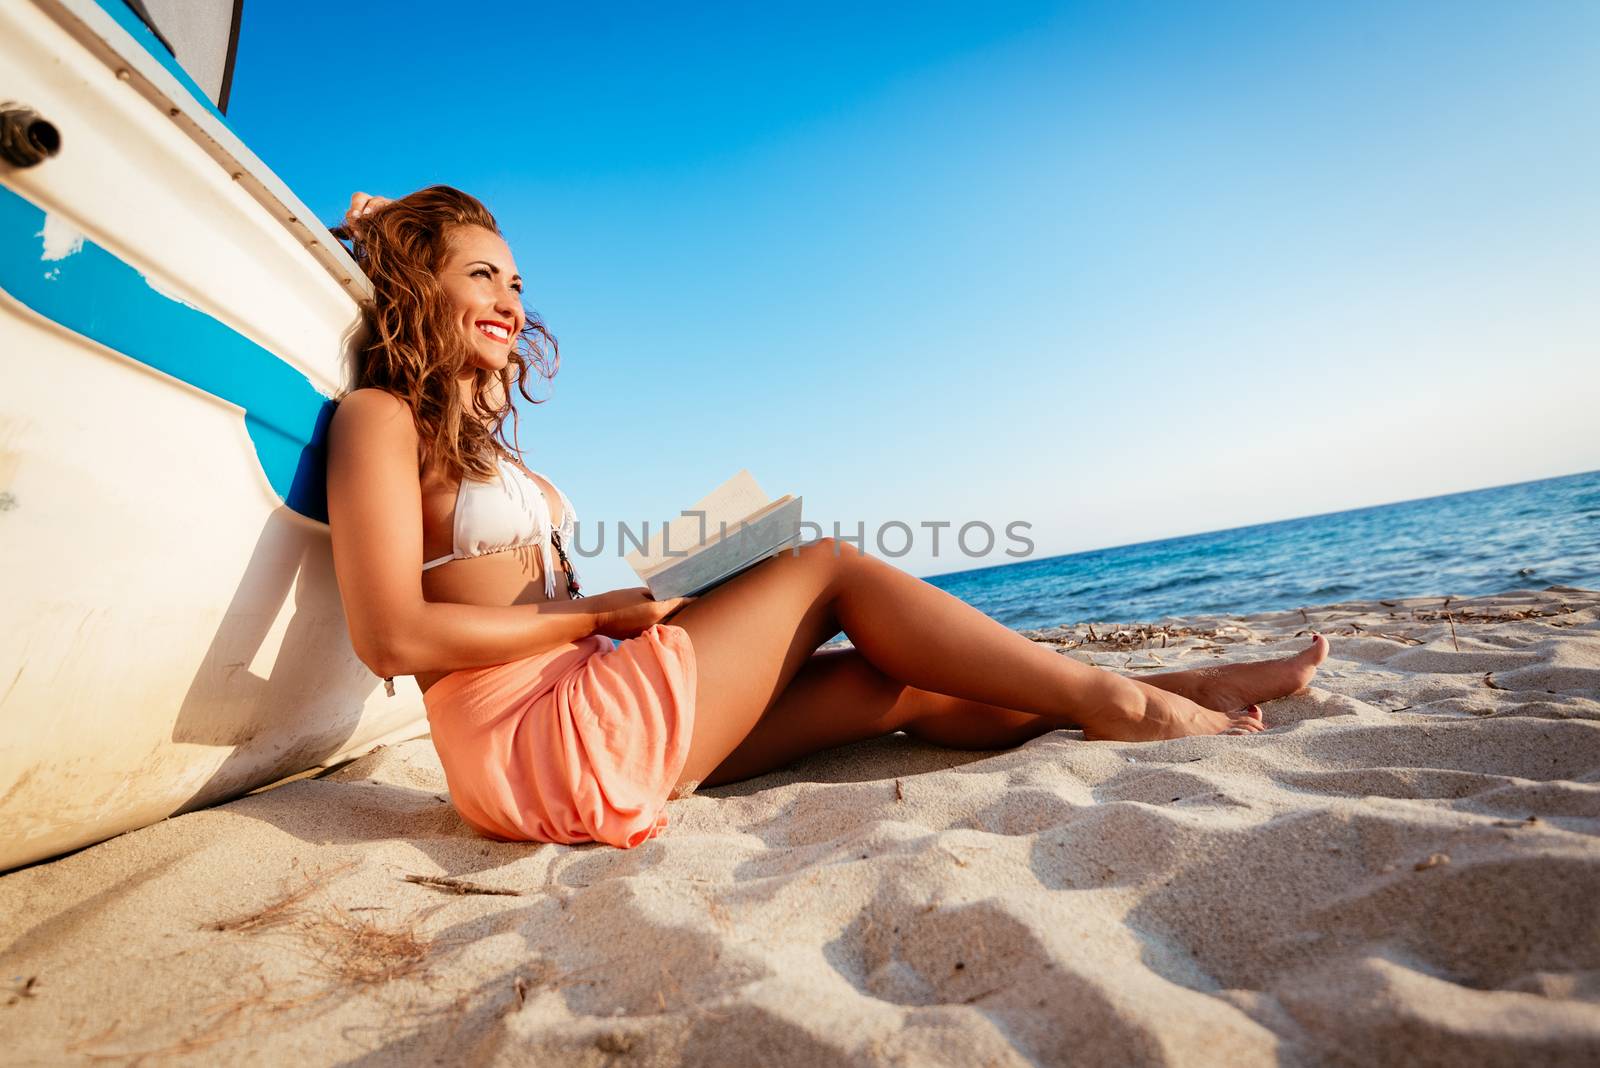 Young woman reading a book on the sandy beach.  She is sitting next to boat and looking away with smile on her thinking face.